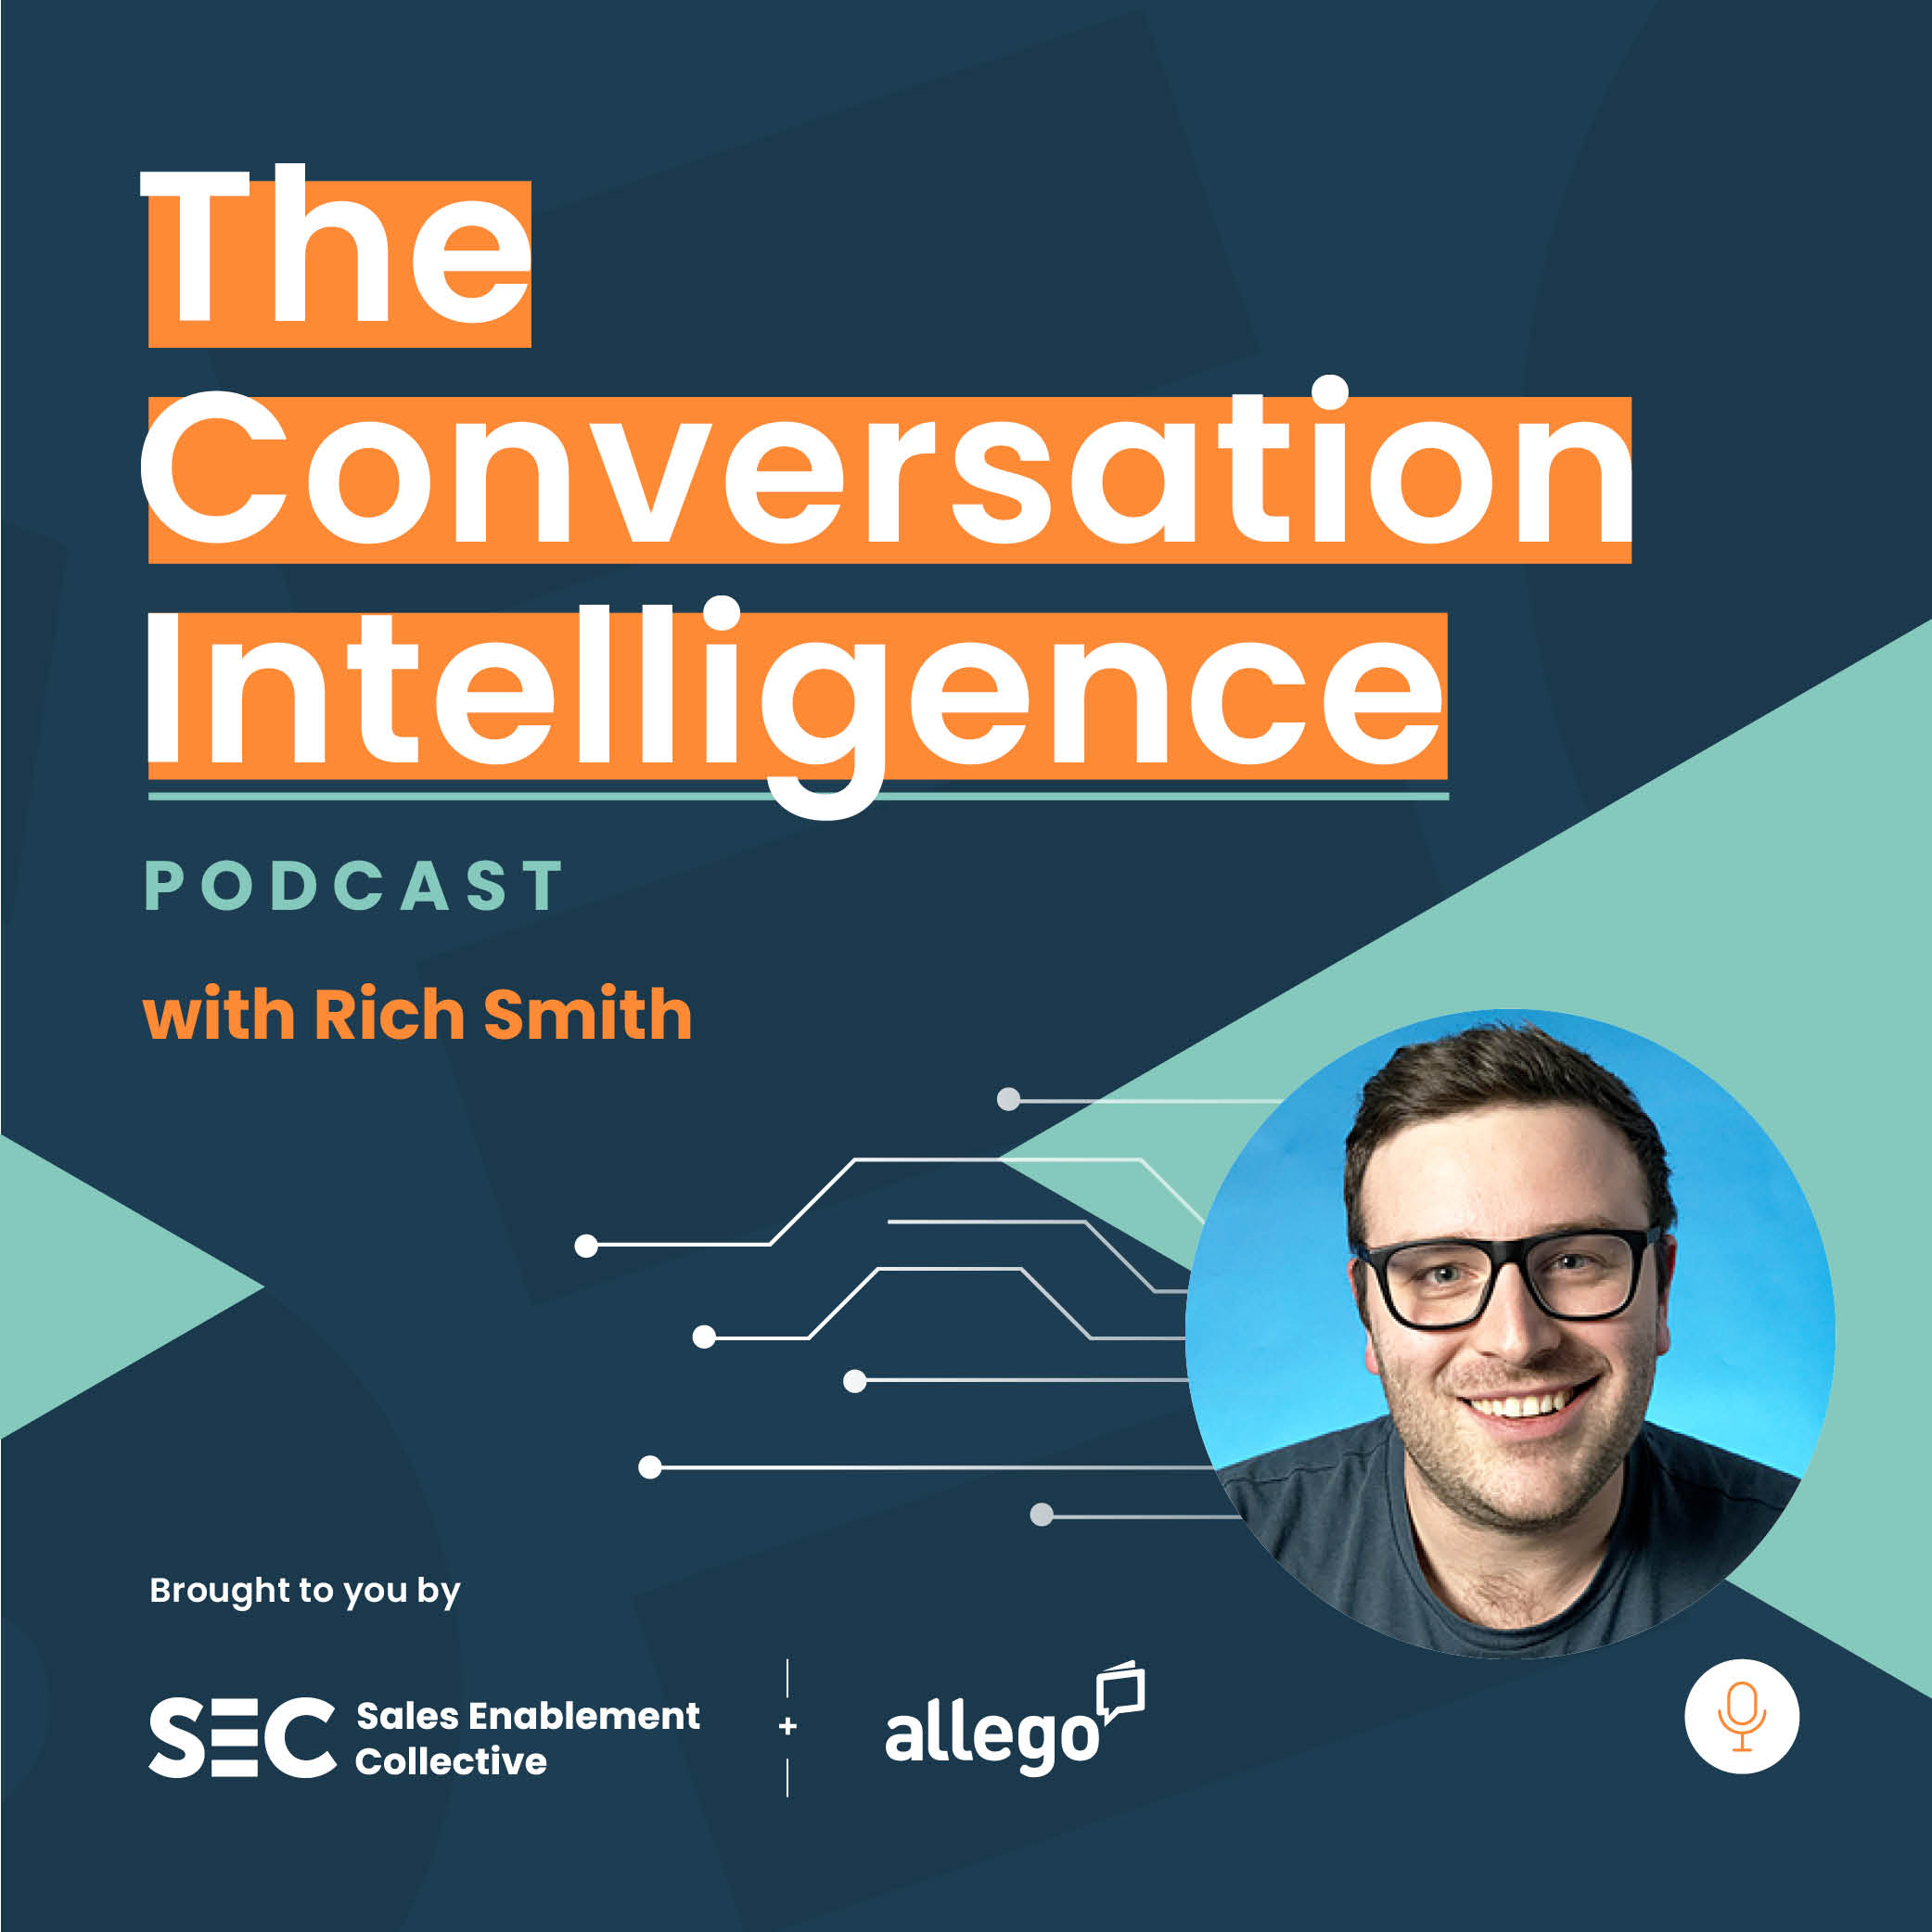 "Without understanding front line sales conversations, your sales enablement strategy is doomed for failure" | Rich Smith, VP of Sales EMEA, Allego